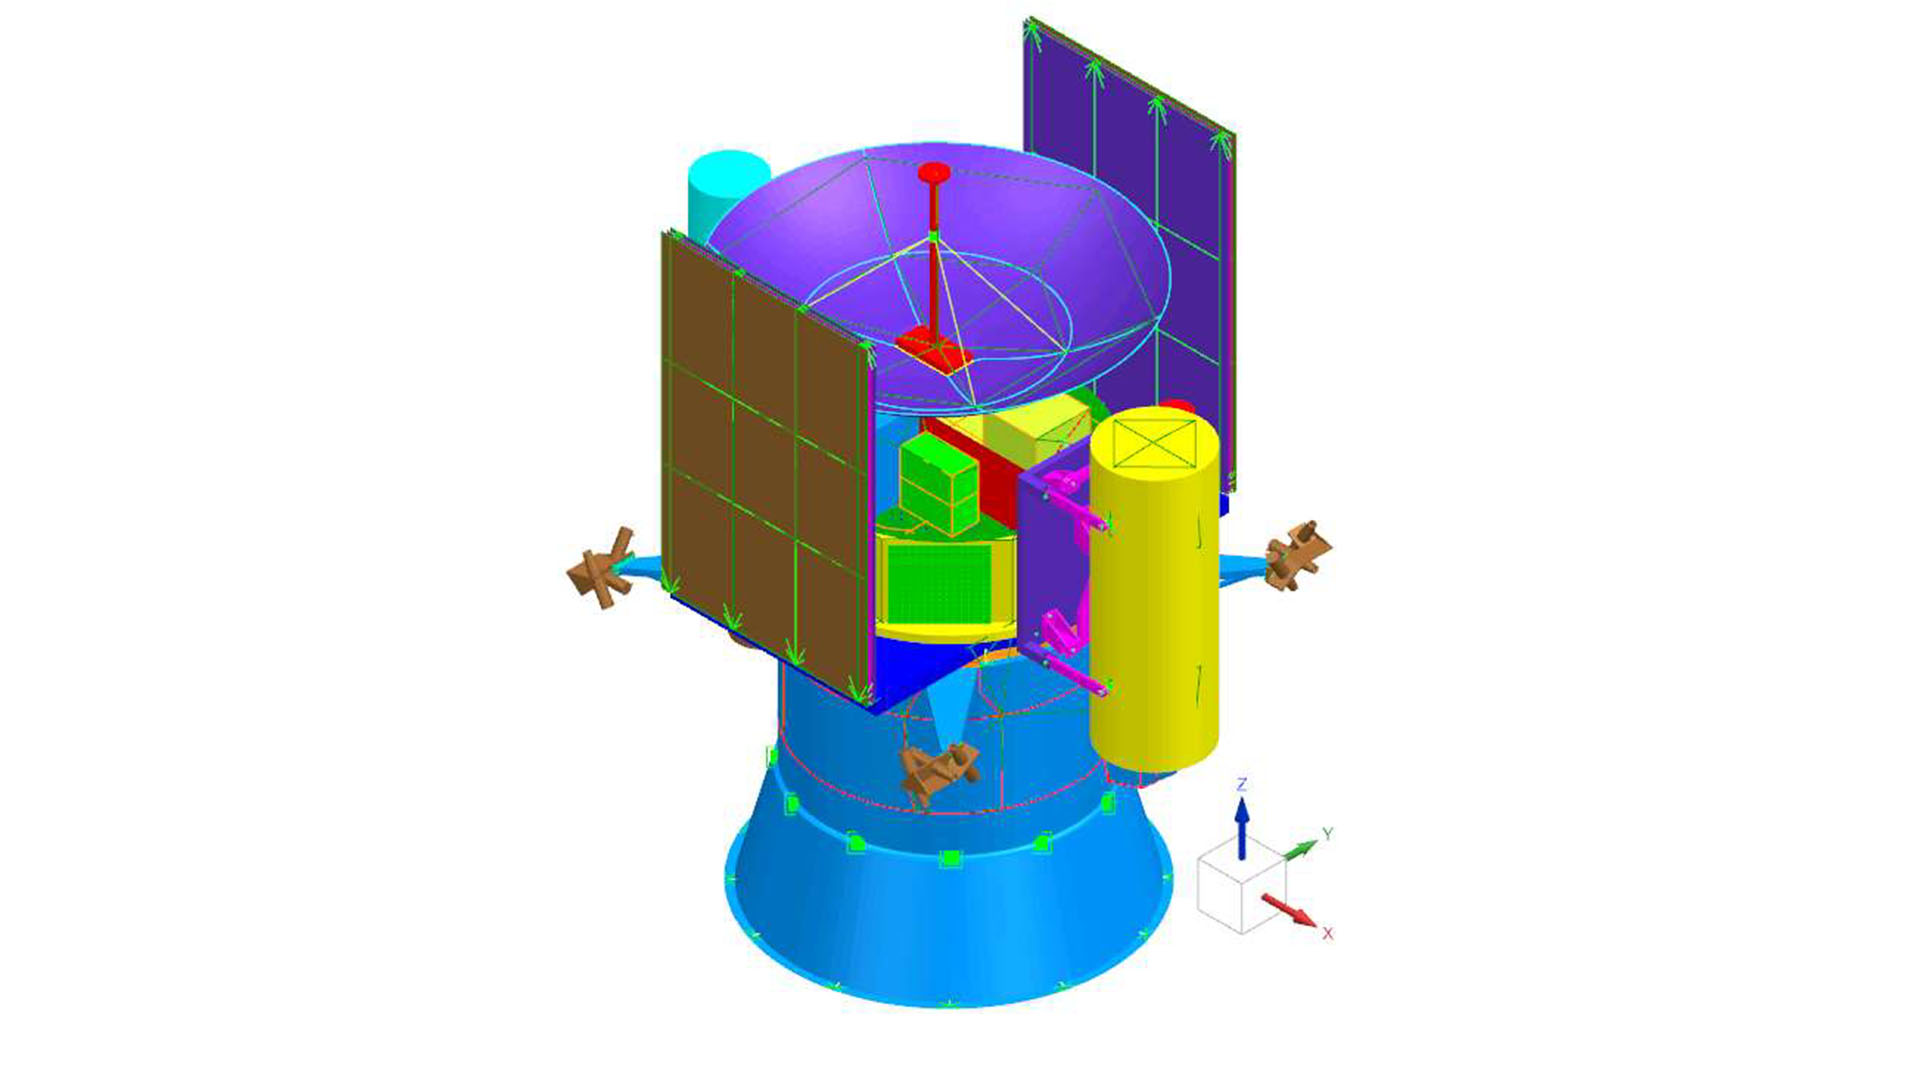 A satellite model solved with the SATK